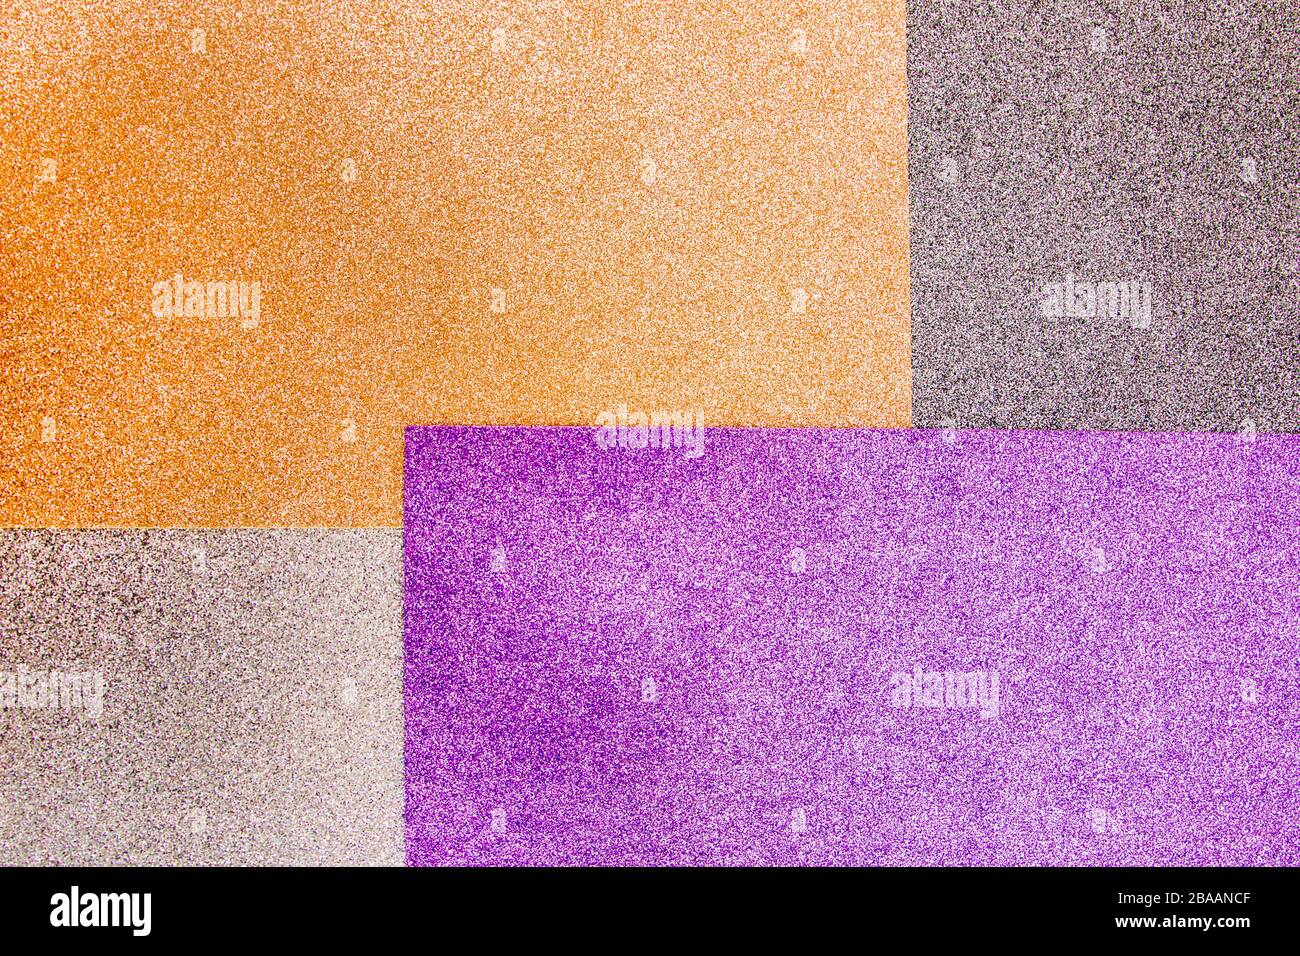 Abstract Background with Vibrant Purple and Gold Metallic